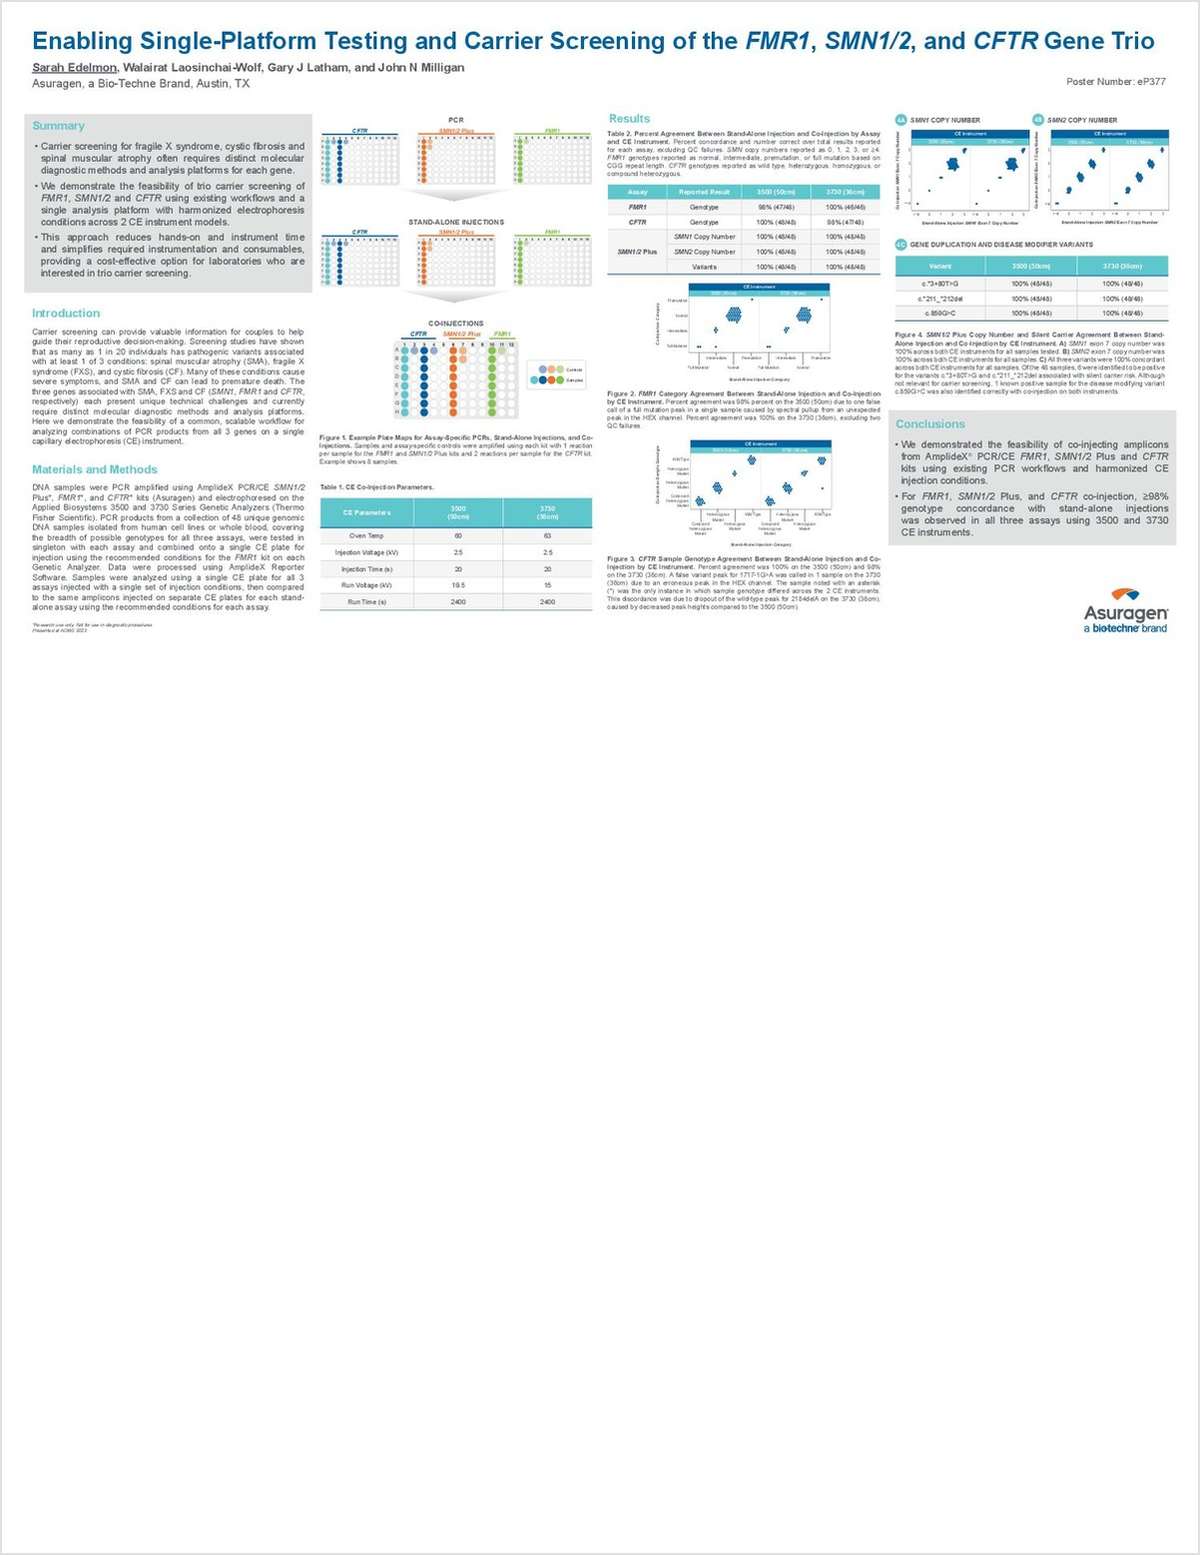 Enabling Single-Platform Testing and Carrier Screening of the FMR1, SMN1/2, and CFTR Gene Trio